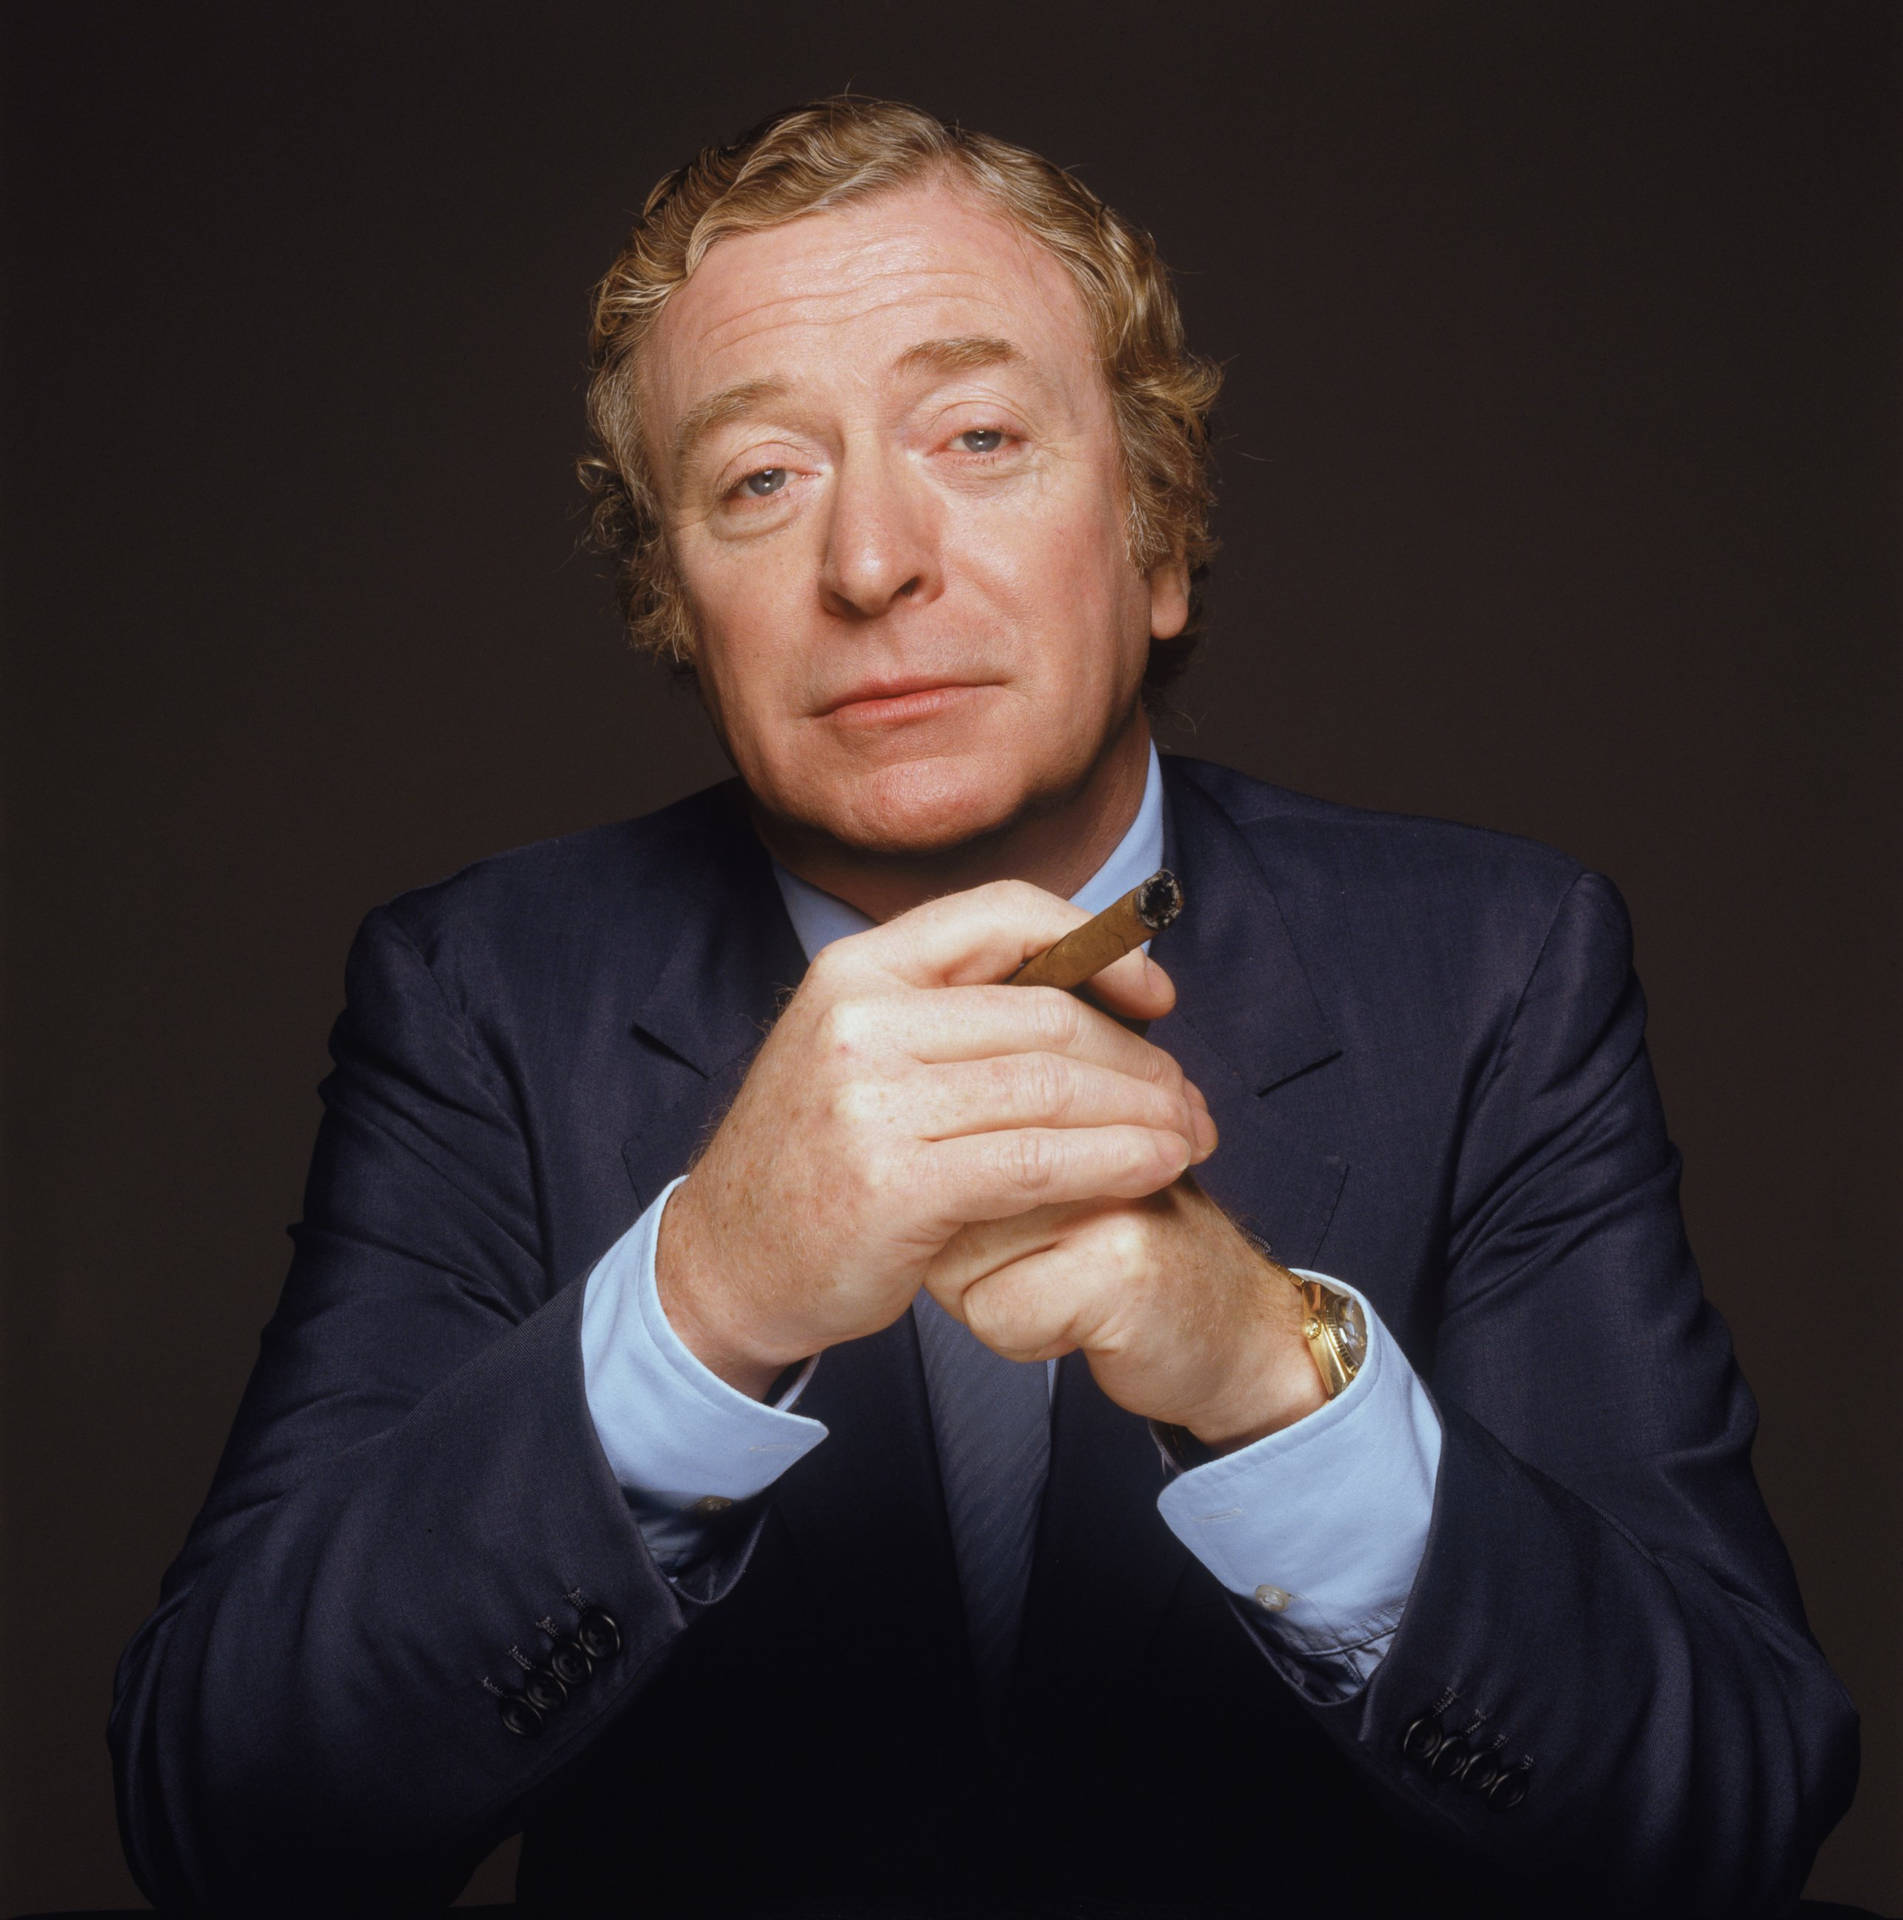 Iconic British Actor Michael Caine in a 1995 Portrait. Wallpaper